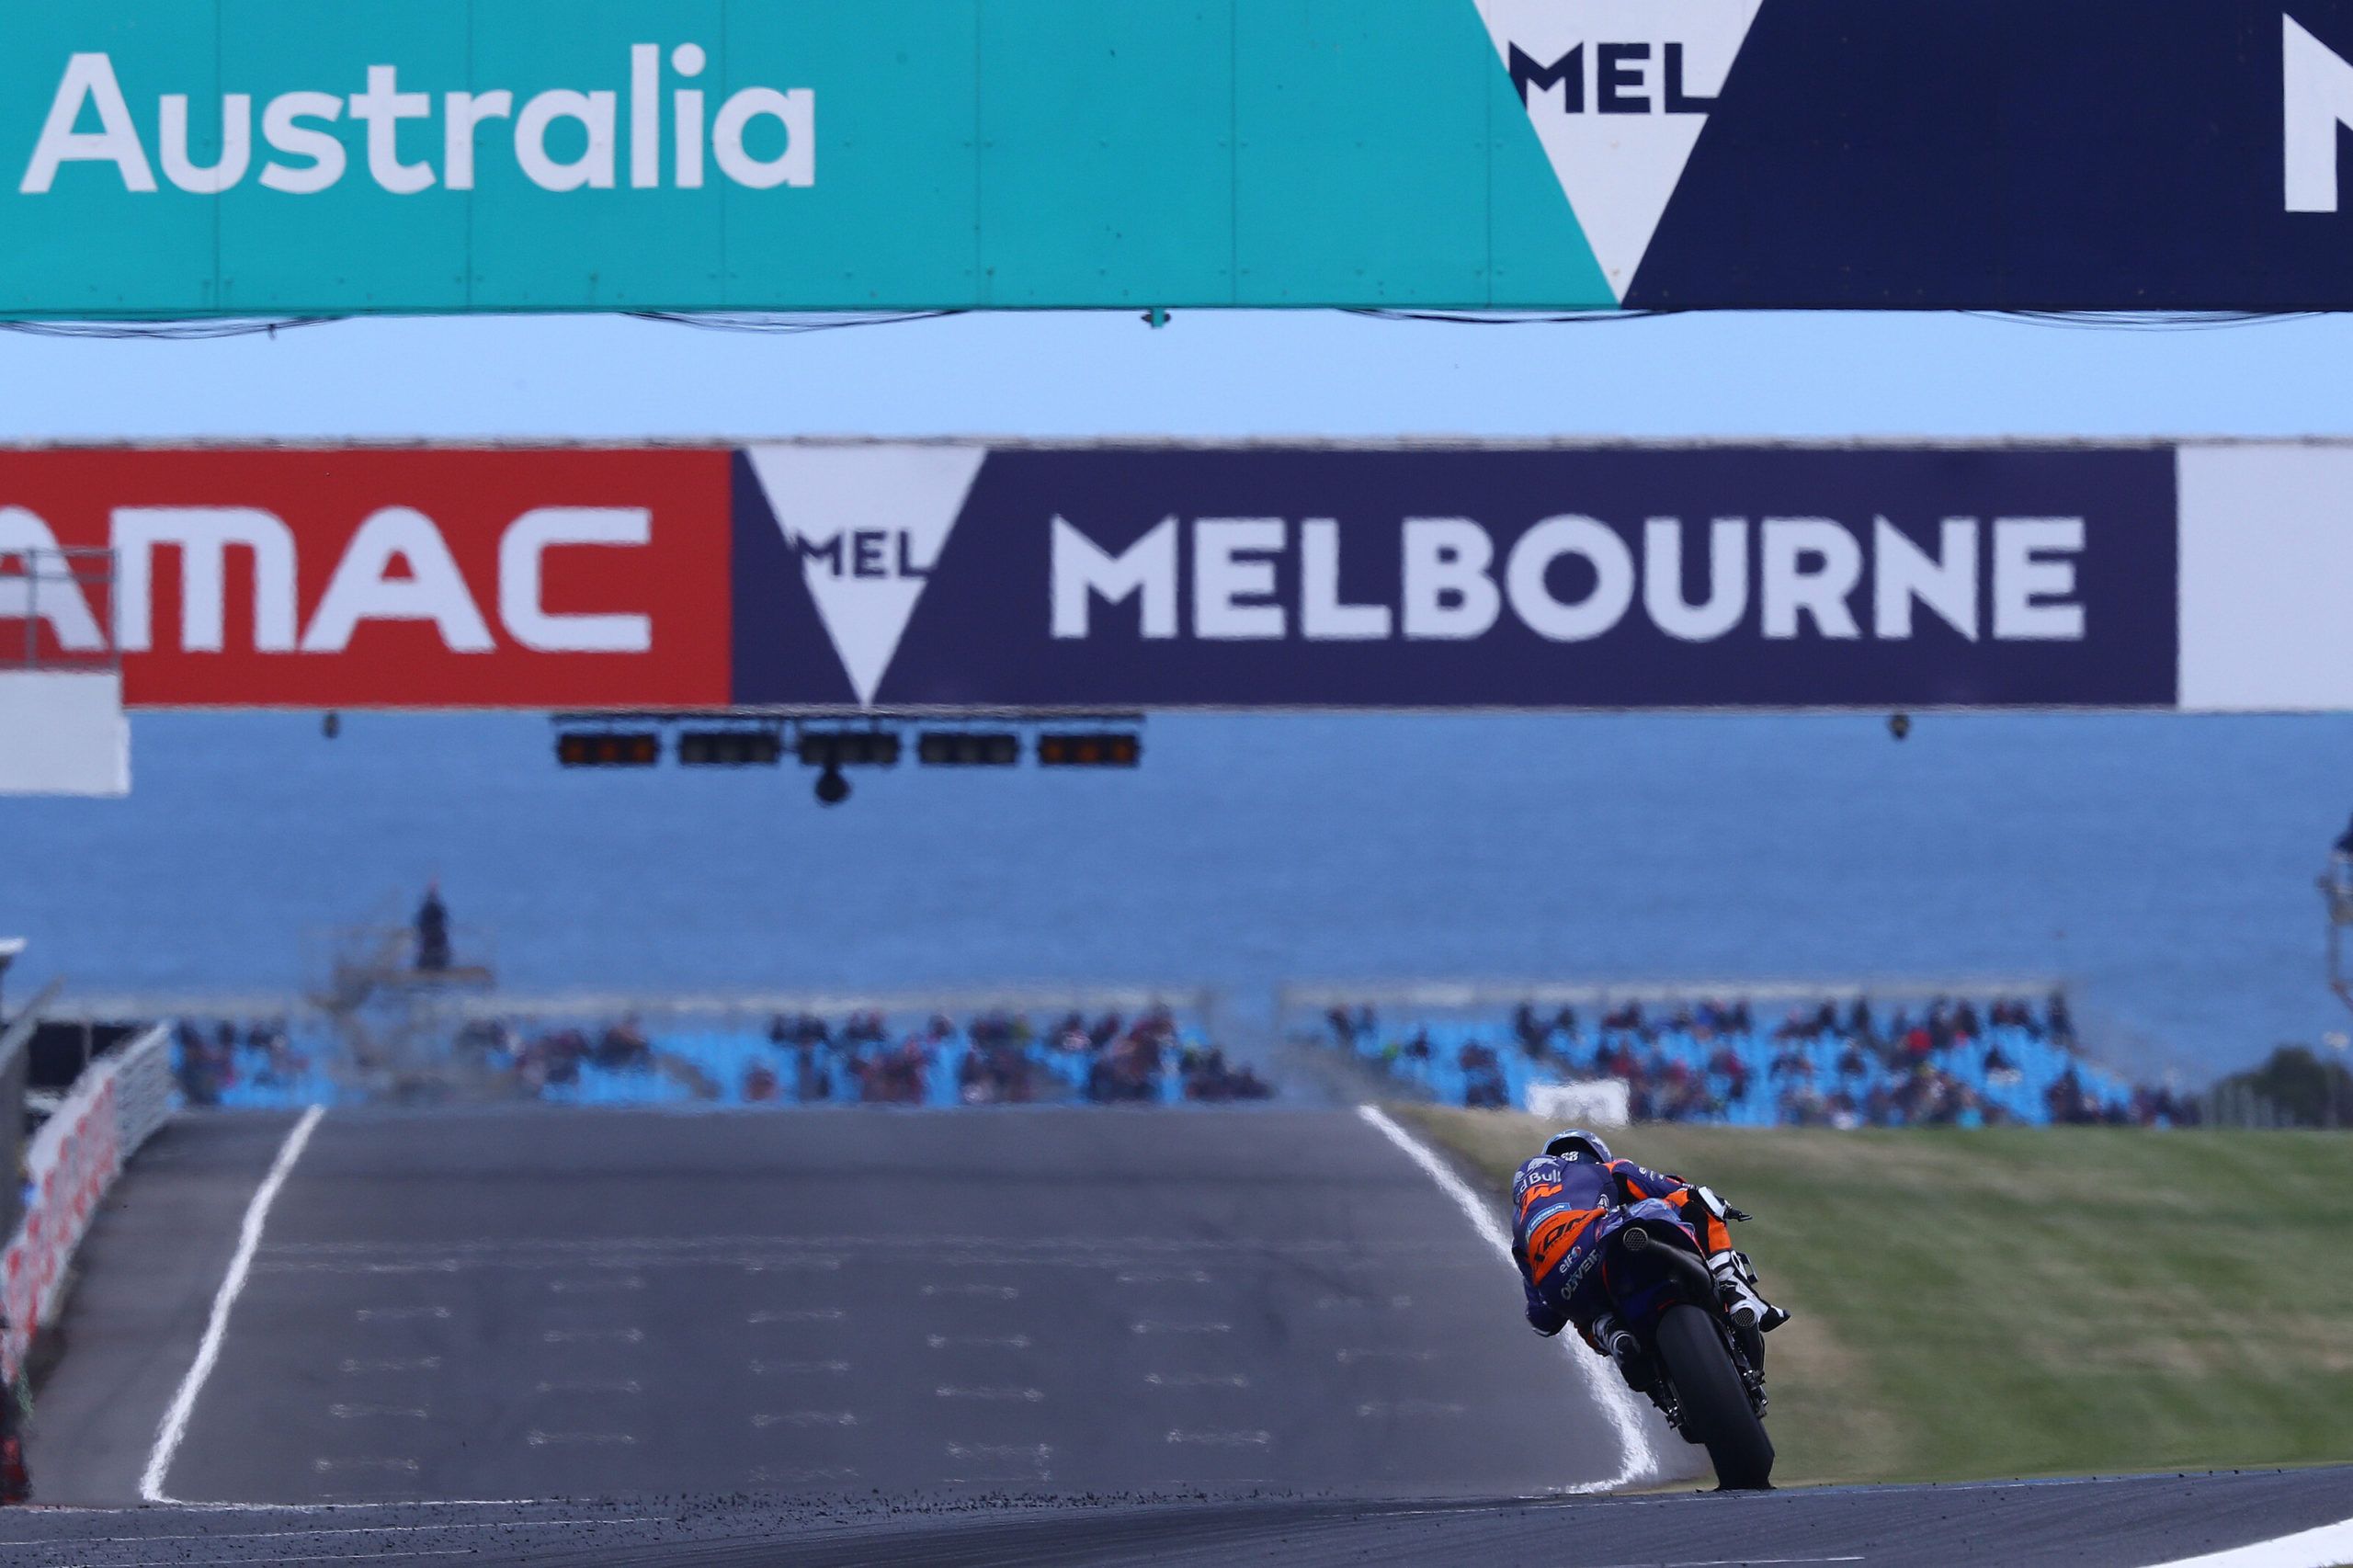 MotoGP sees cancellation of both British GP and Australian GP for 2020